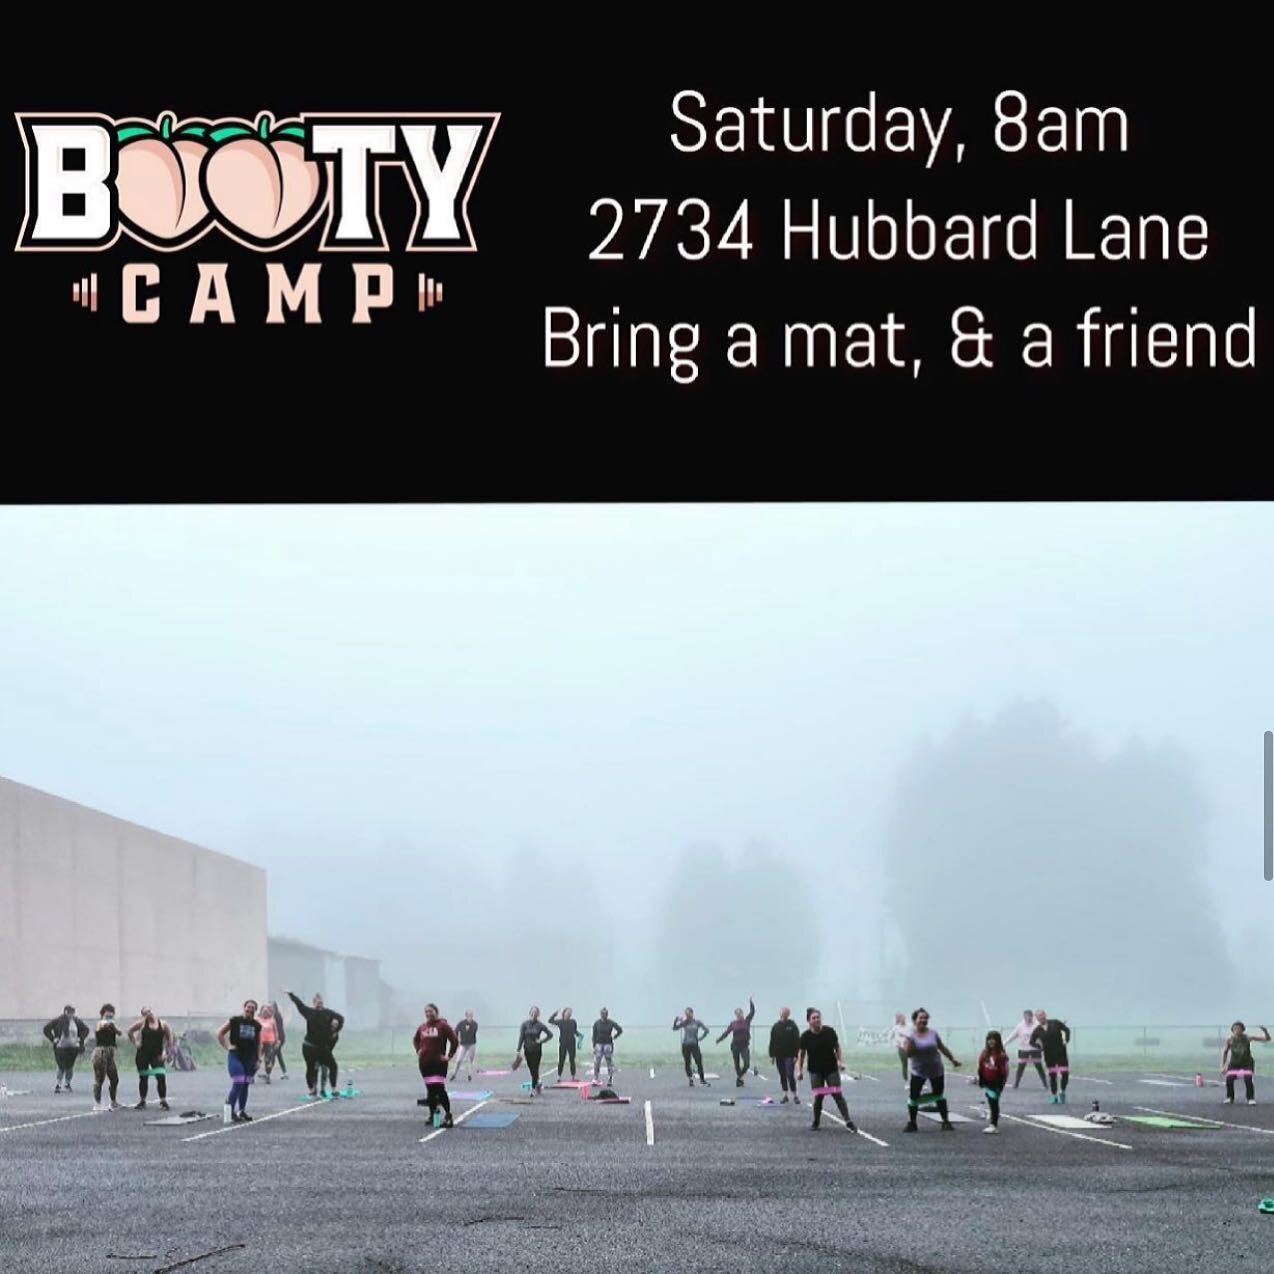 I&rsquo;m doing a BOOTYcamp tomorrow, 7/17 at @theathletefactory707 
Come join the fun! You bring a mat and your 🍑, I bring the booty bands

.

Tires and sleds are on the menu so don&rsquo;t wear your most beautiful workout clothes, the tires get a 